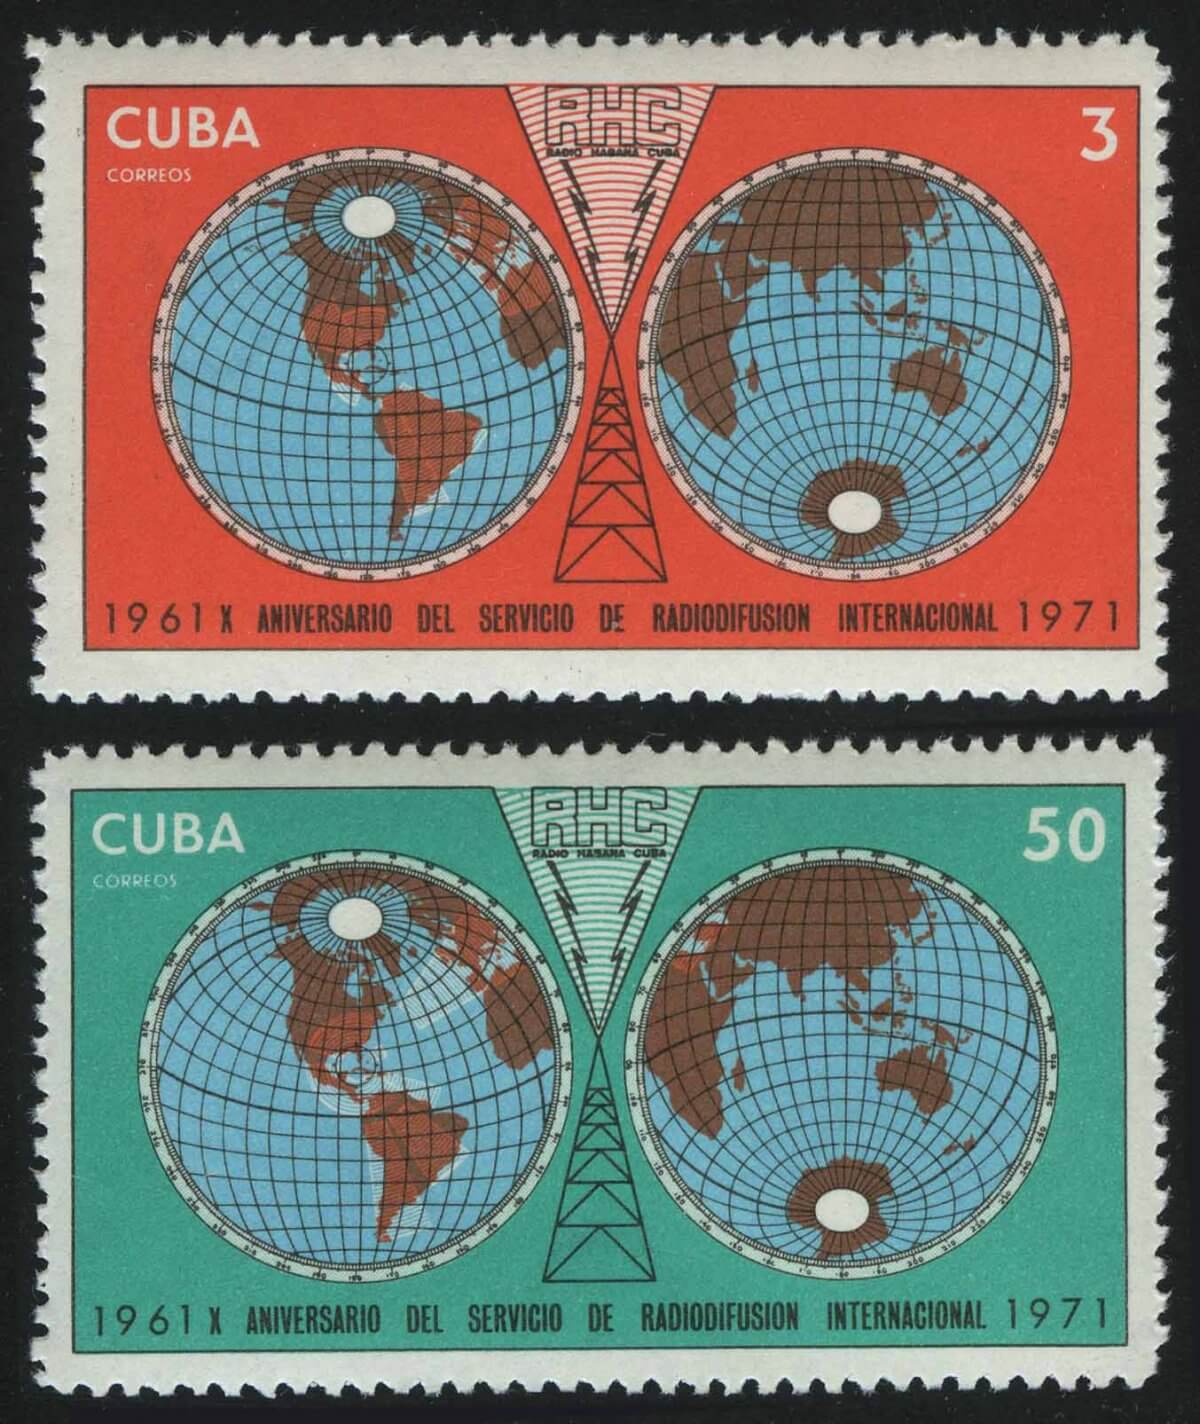 1971 The 10th Anniversary of The Cuban International Broadcasting Services